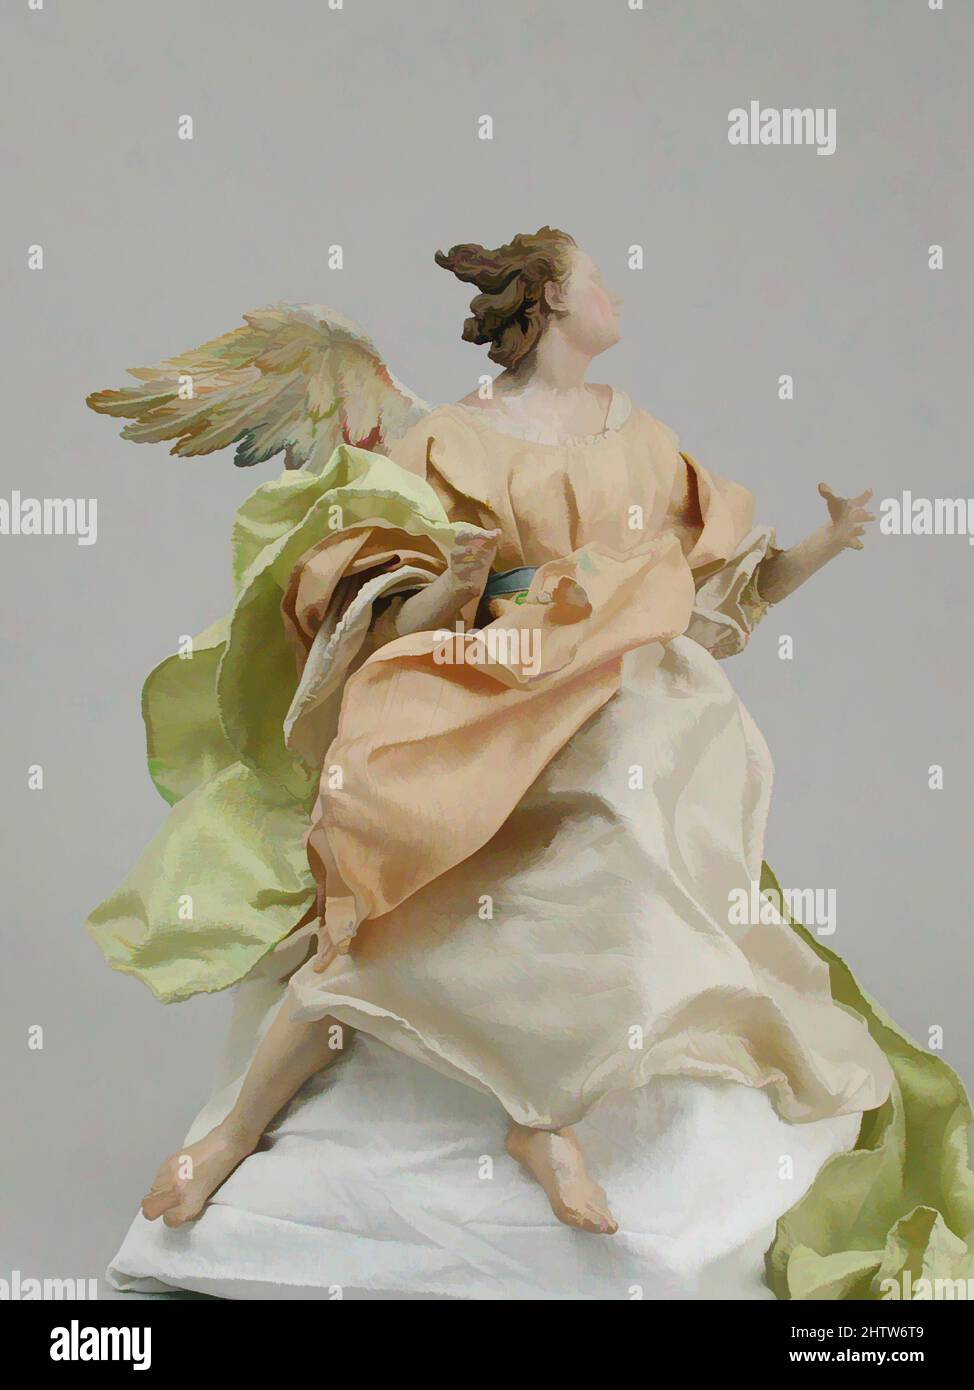 Art inspired by Angel, second half 18th century, Italian, Naples, Polychromed terracotta head; wooden limbs and wings; body of wire wrapped in tow; various fabrics, H. 16 in. (40.6 cm.), Crèche, Classic works modernized by Artotop with a splash of modernity. Shapes, color and value, eye-catching visual impact on art. Emotions through freedom of artworks in a contemporary way. A timeless message pursuing a wildly creative new direction. Artists turning to the digital medium and creating the Artotop NFT Stock Photo